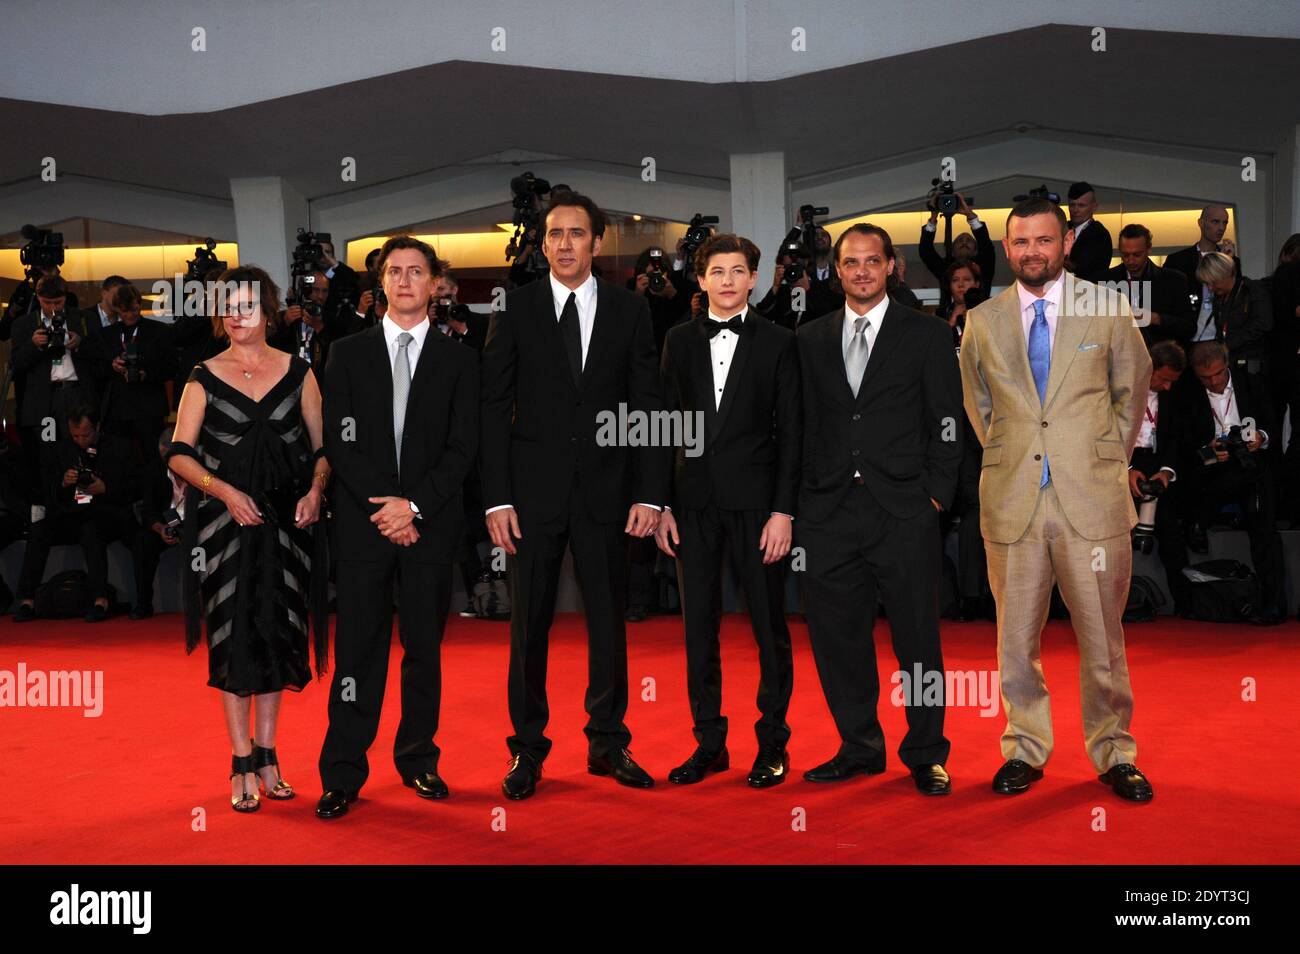 Producer Christopher Woodrow, actors Ronnie Blevins, Tye Sheridan, Nicolas Cage, director David Gordon Green and producer Lisa Muska attending the premiere for the film Joe as part of the 70th Venice International Film Festival (Mostra), at Lido island in Venice, Italy, on August 30, 2013. Photo by Aurore Marechal/ABACAPRESS.COM Stock Photo